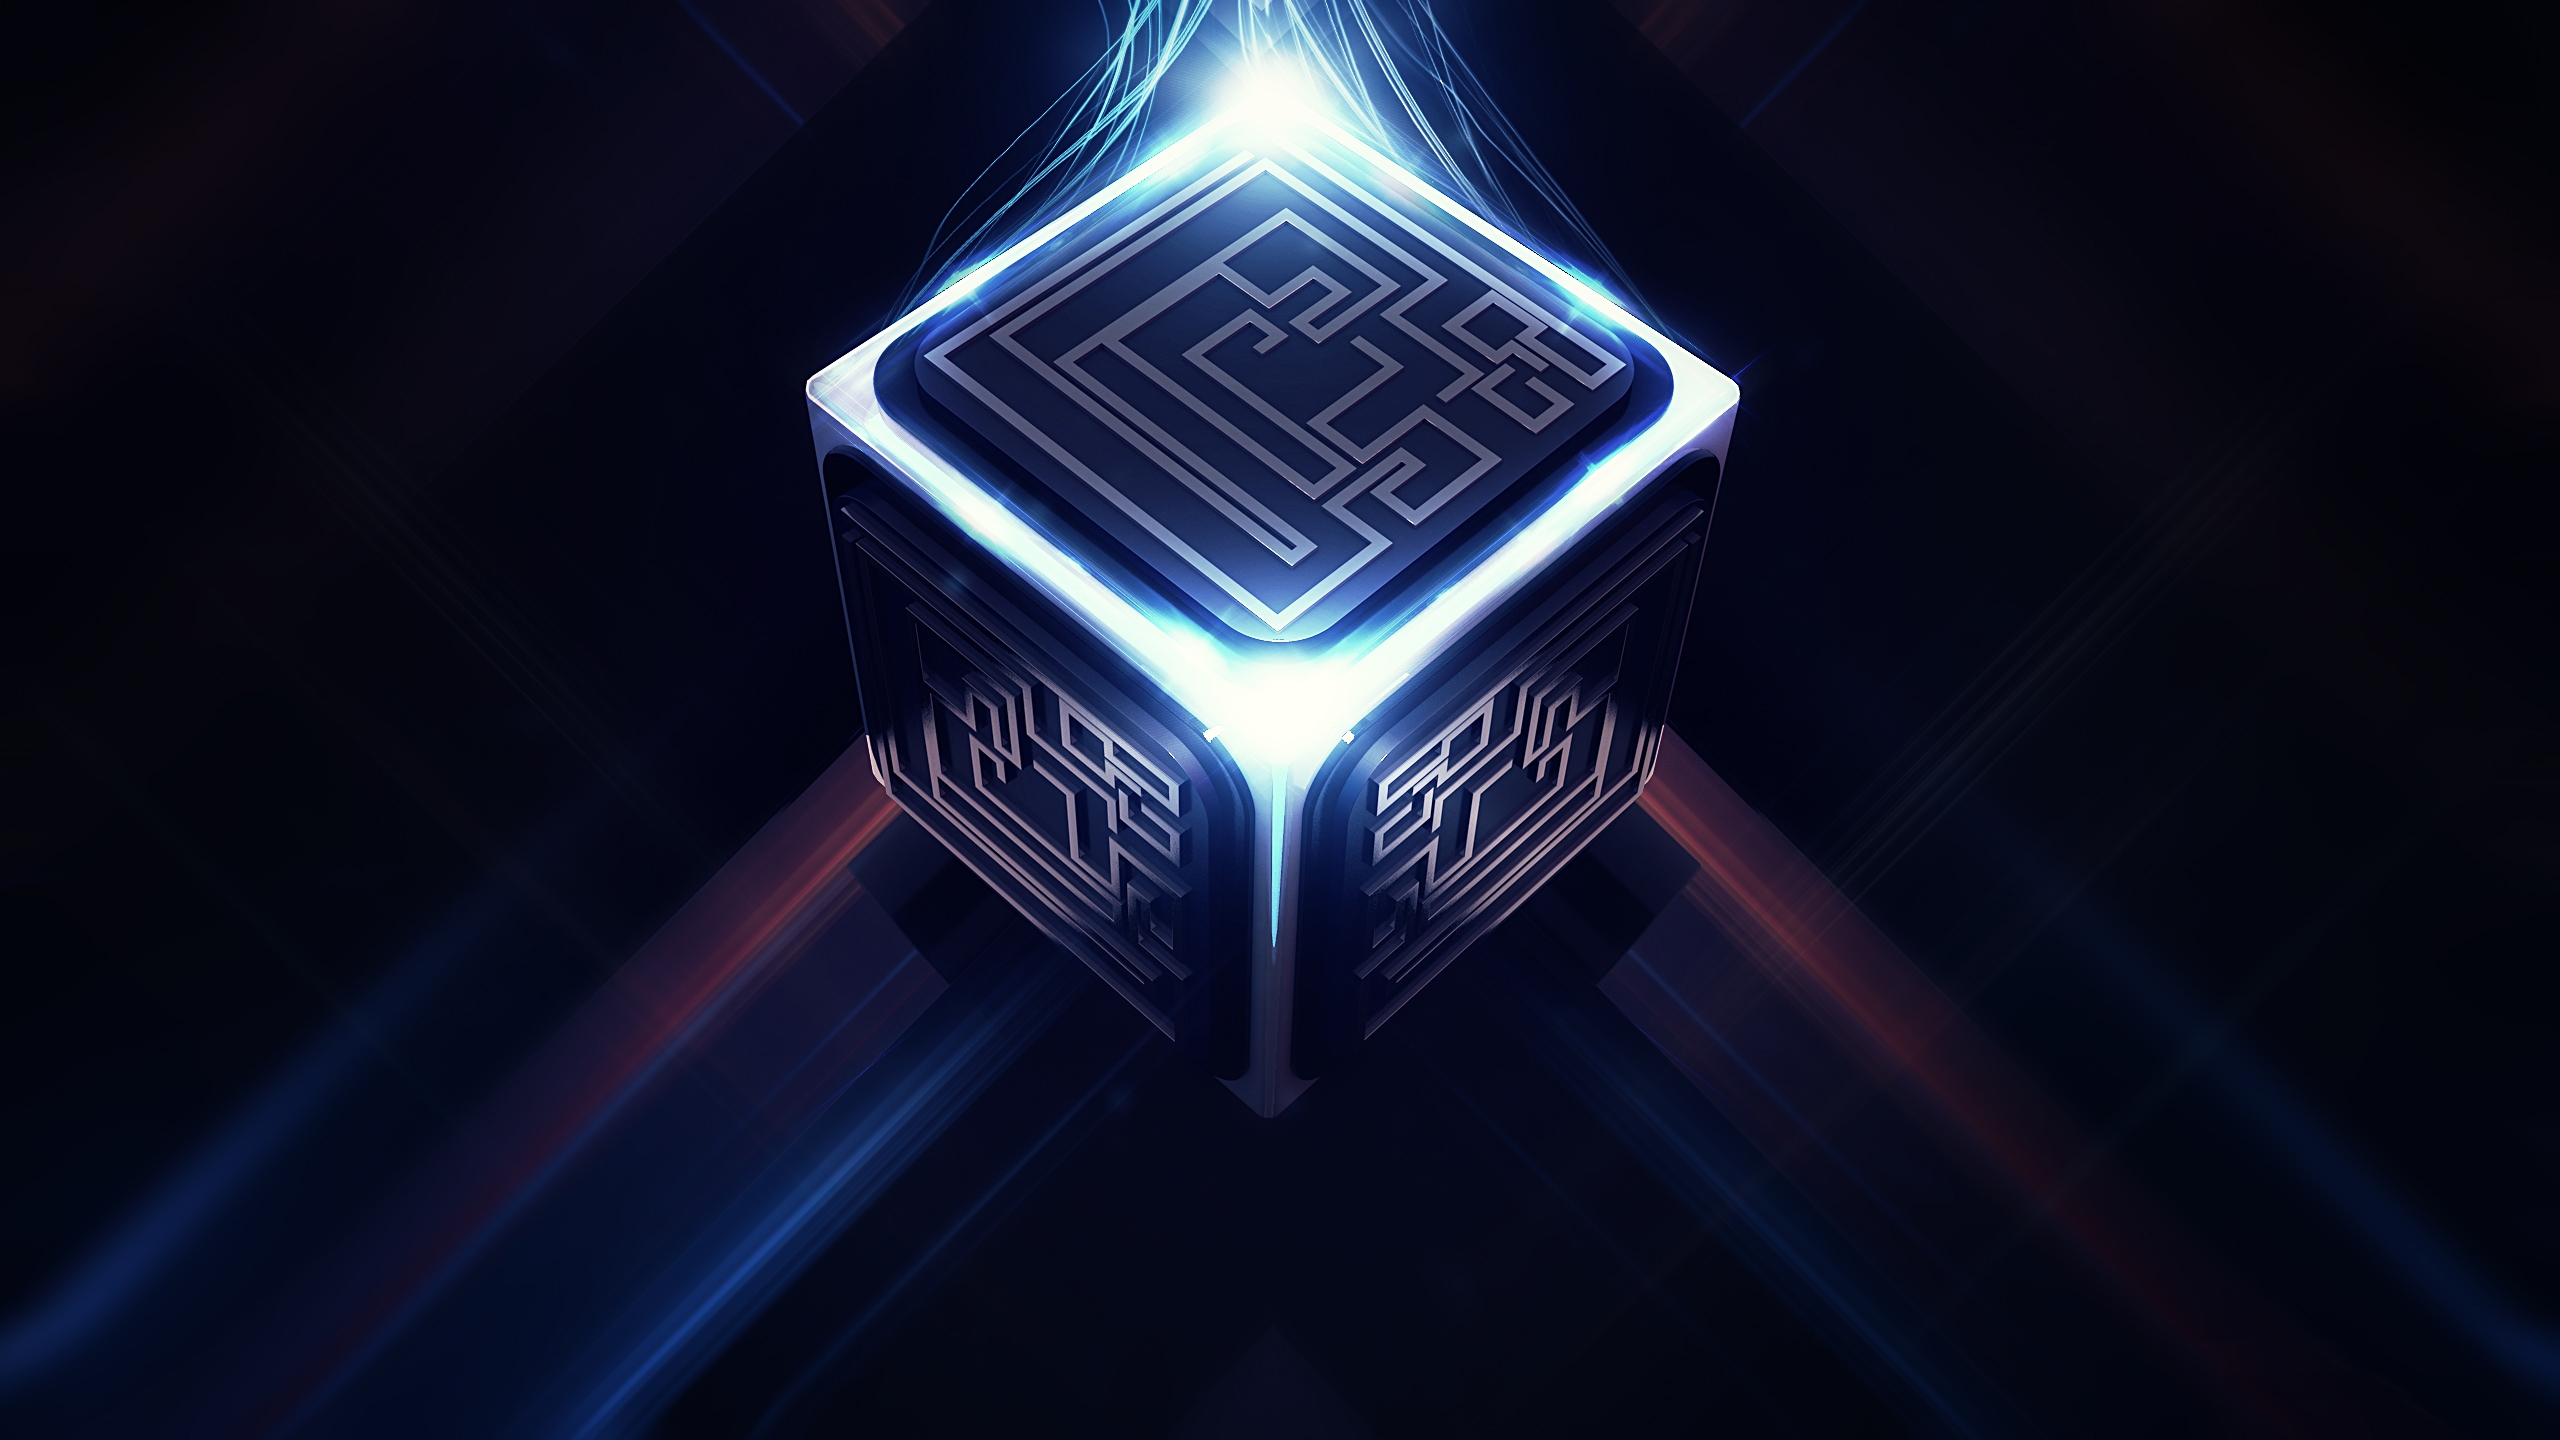 3D Cube Maze Wallpaper   HQ Wallpapers download 100 high quality 2560x1440